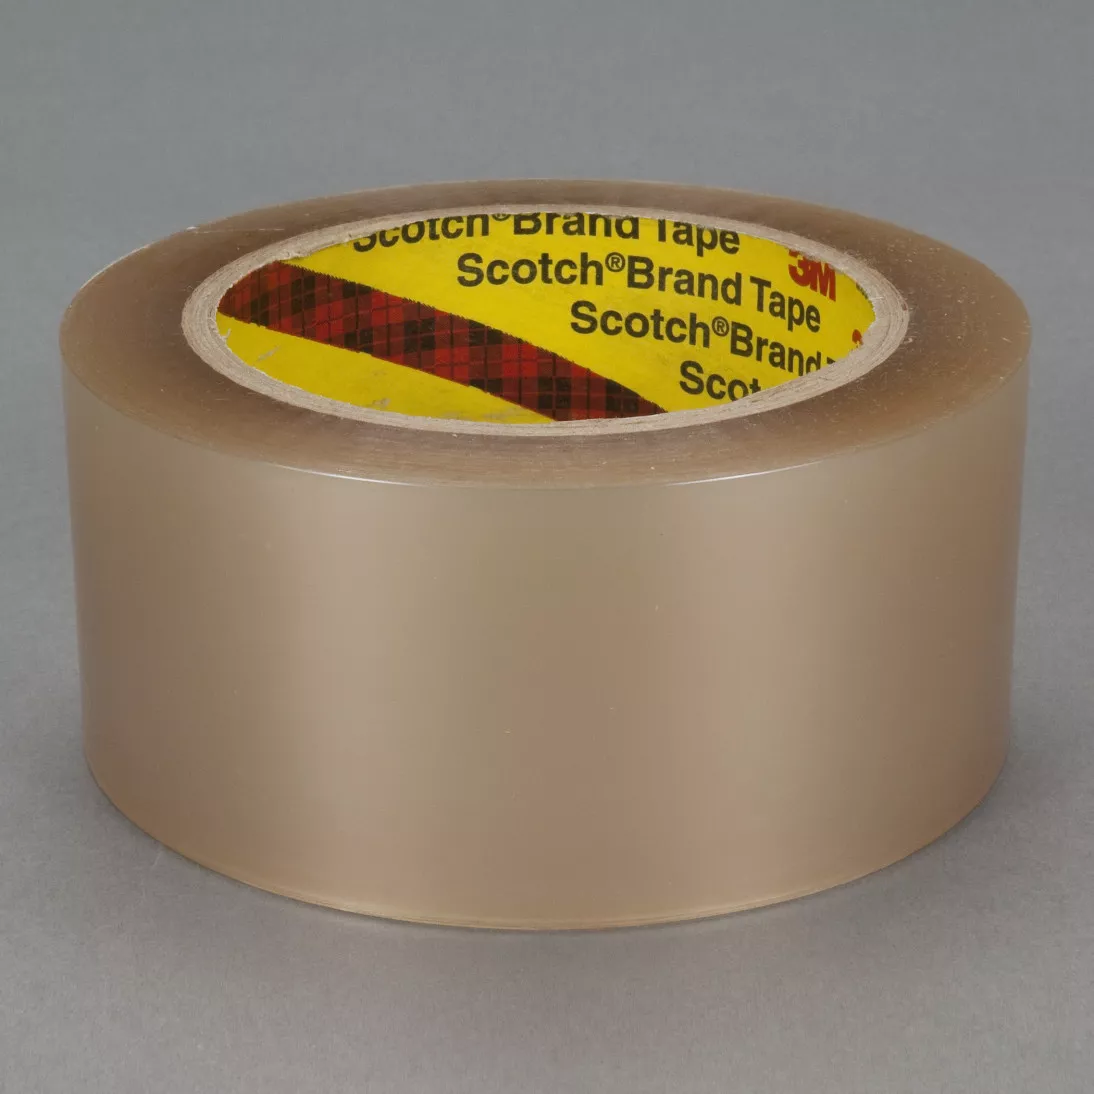 3M™ Polyester Tape 8911, Transparent, 2 in x 72 yd, 2.3 mil, 24 rolls
per case